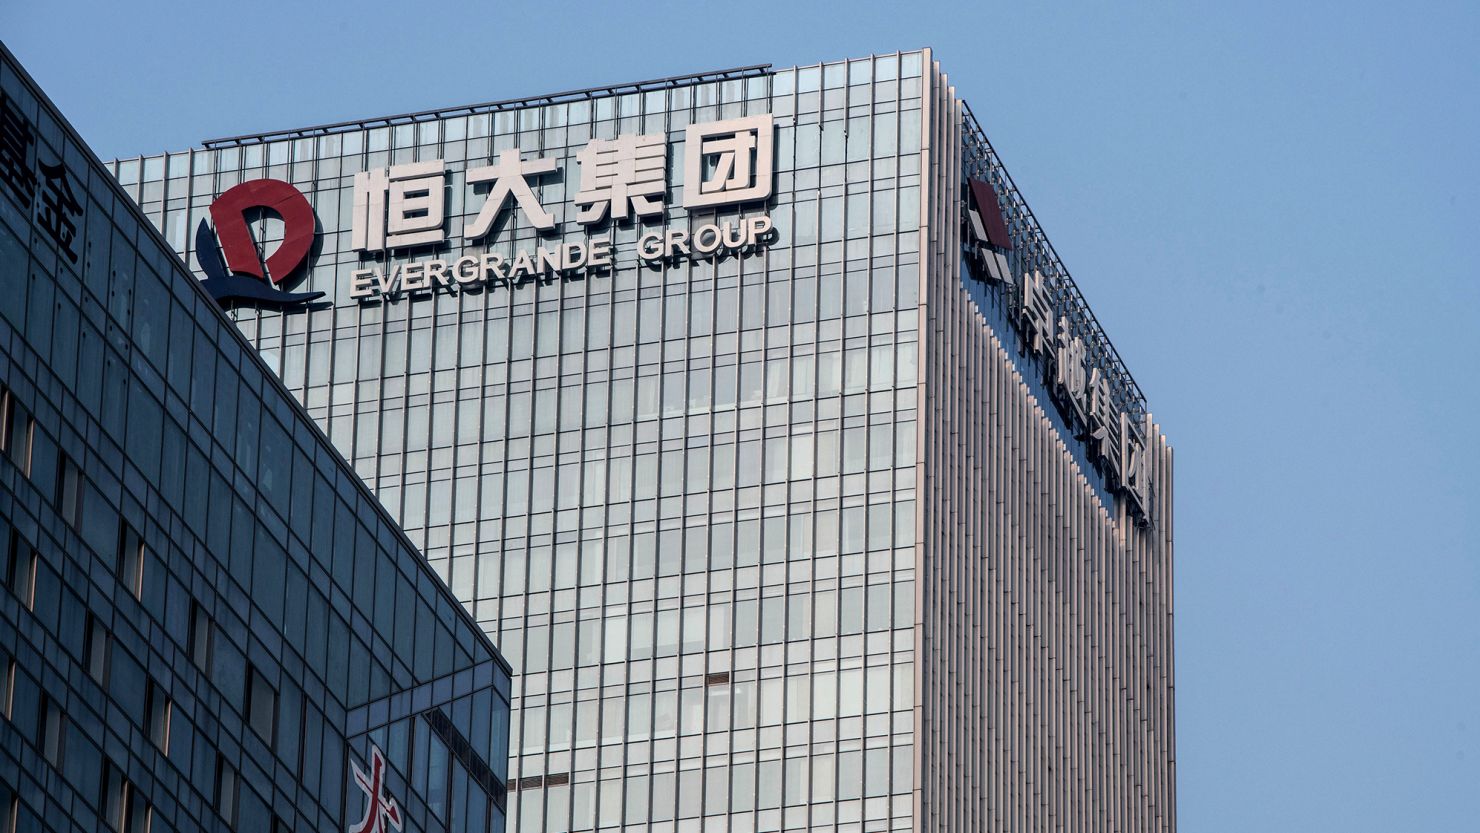 Evergrande is struggling to make peace with creditors, raising the risk of a liquidation of the company.